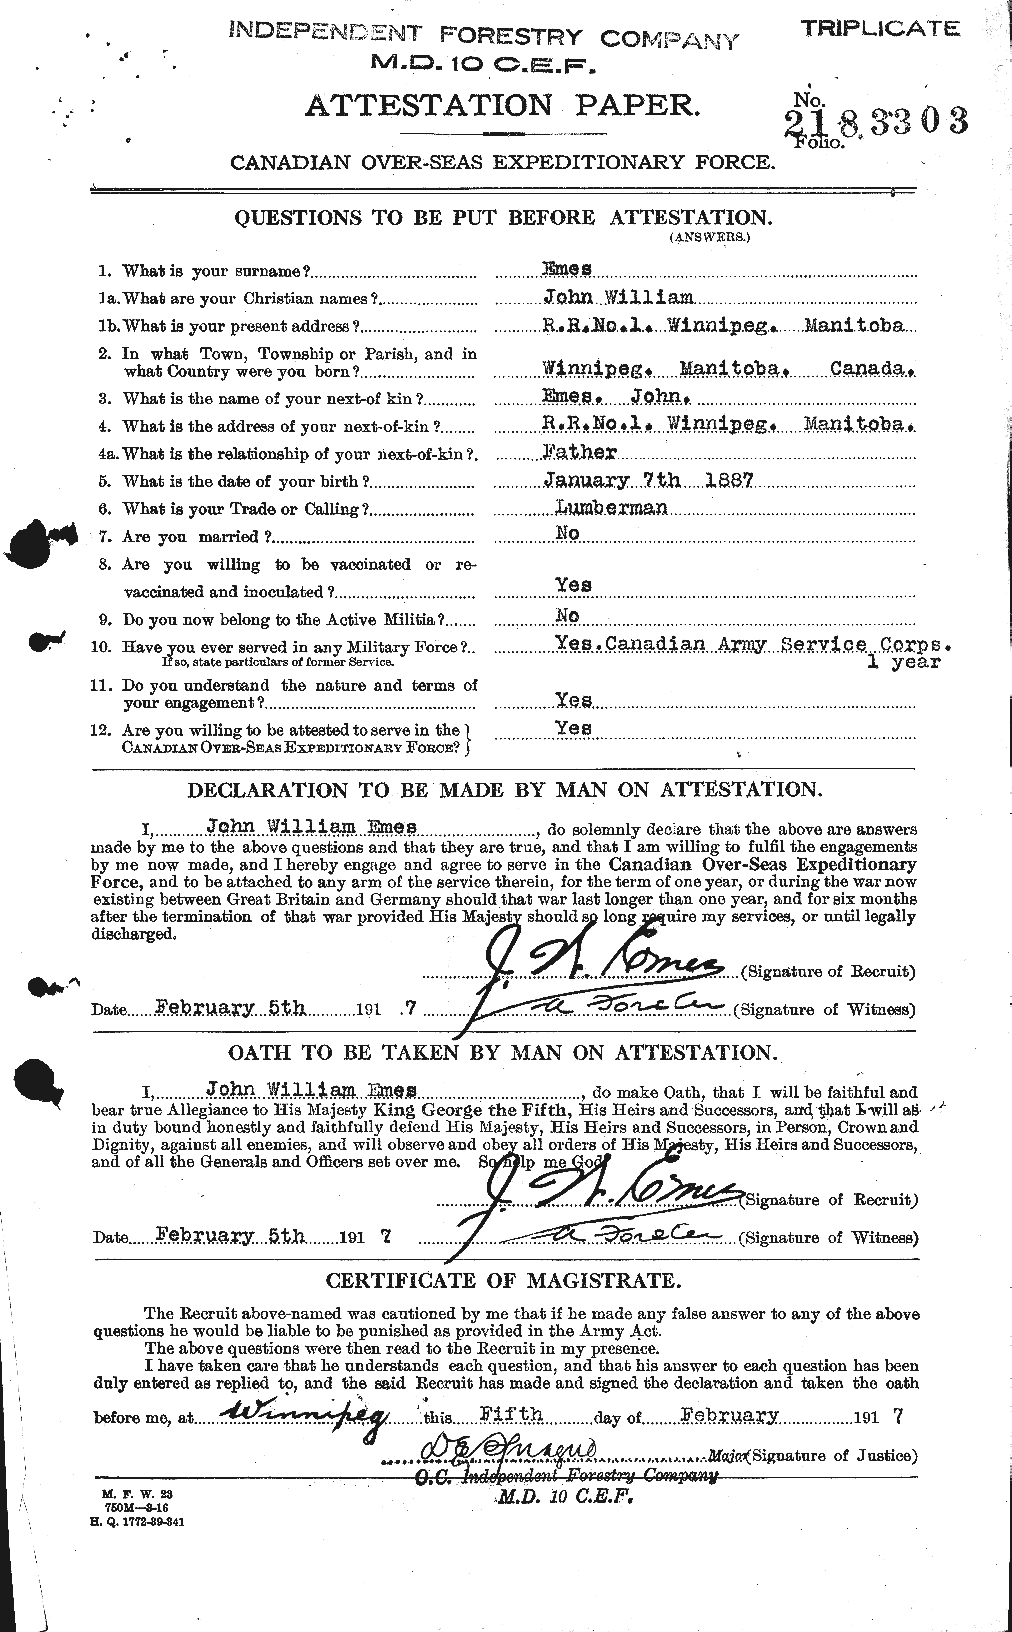 Personnel Records of the First World War - CEF 311598a